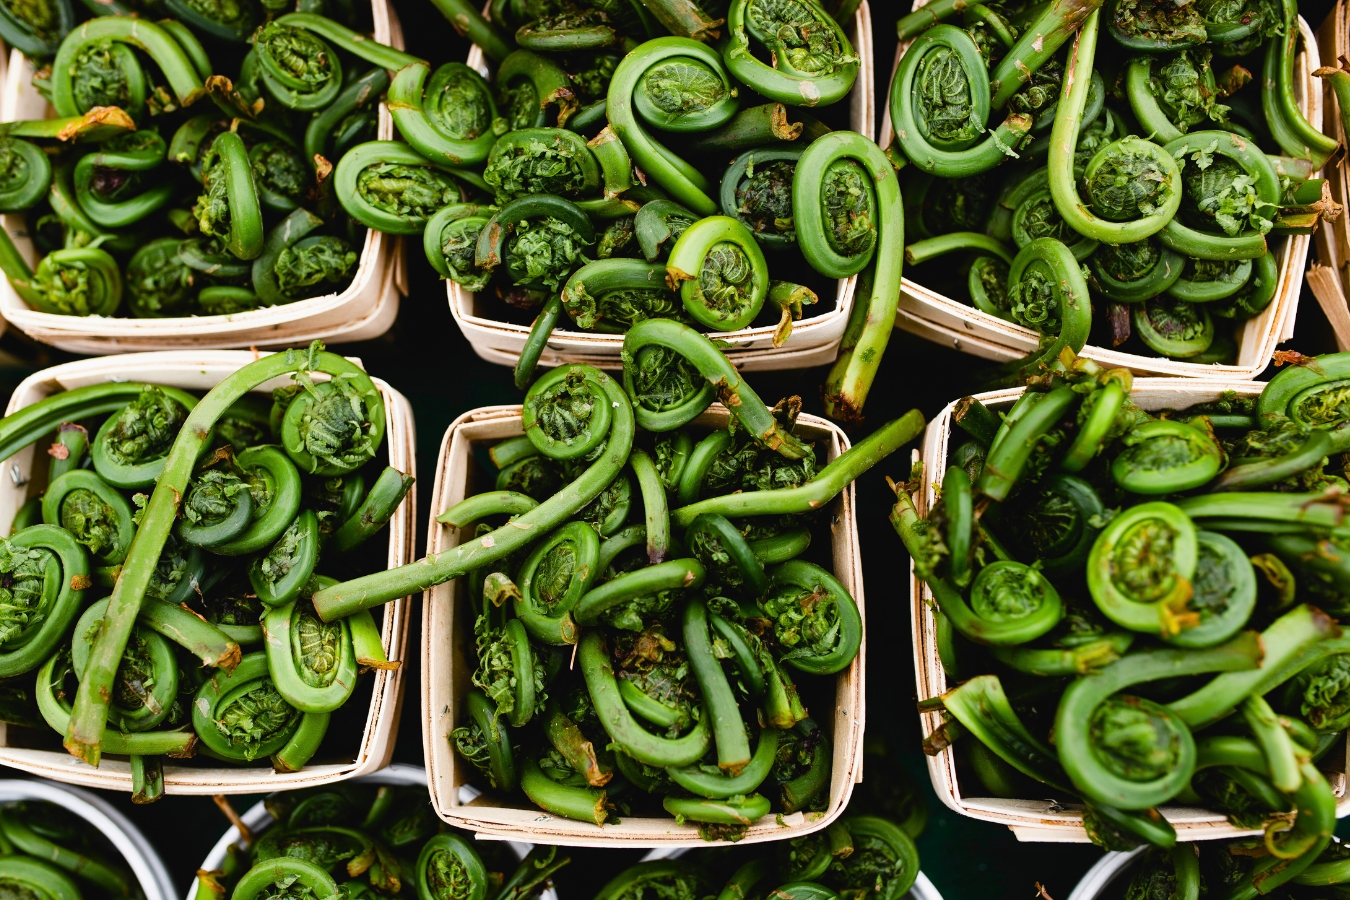 Six cardboard produce baskets filled with curly green fiddleheads.